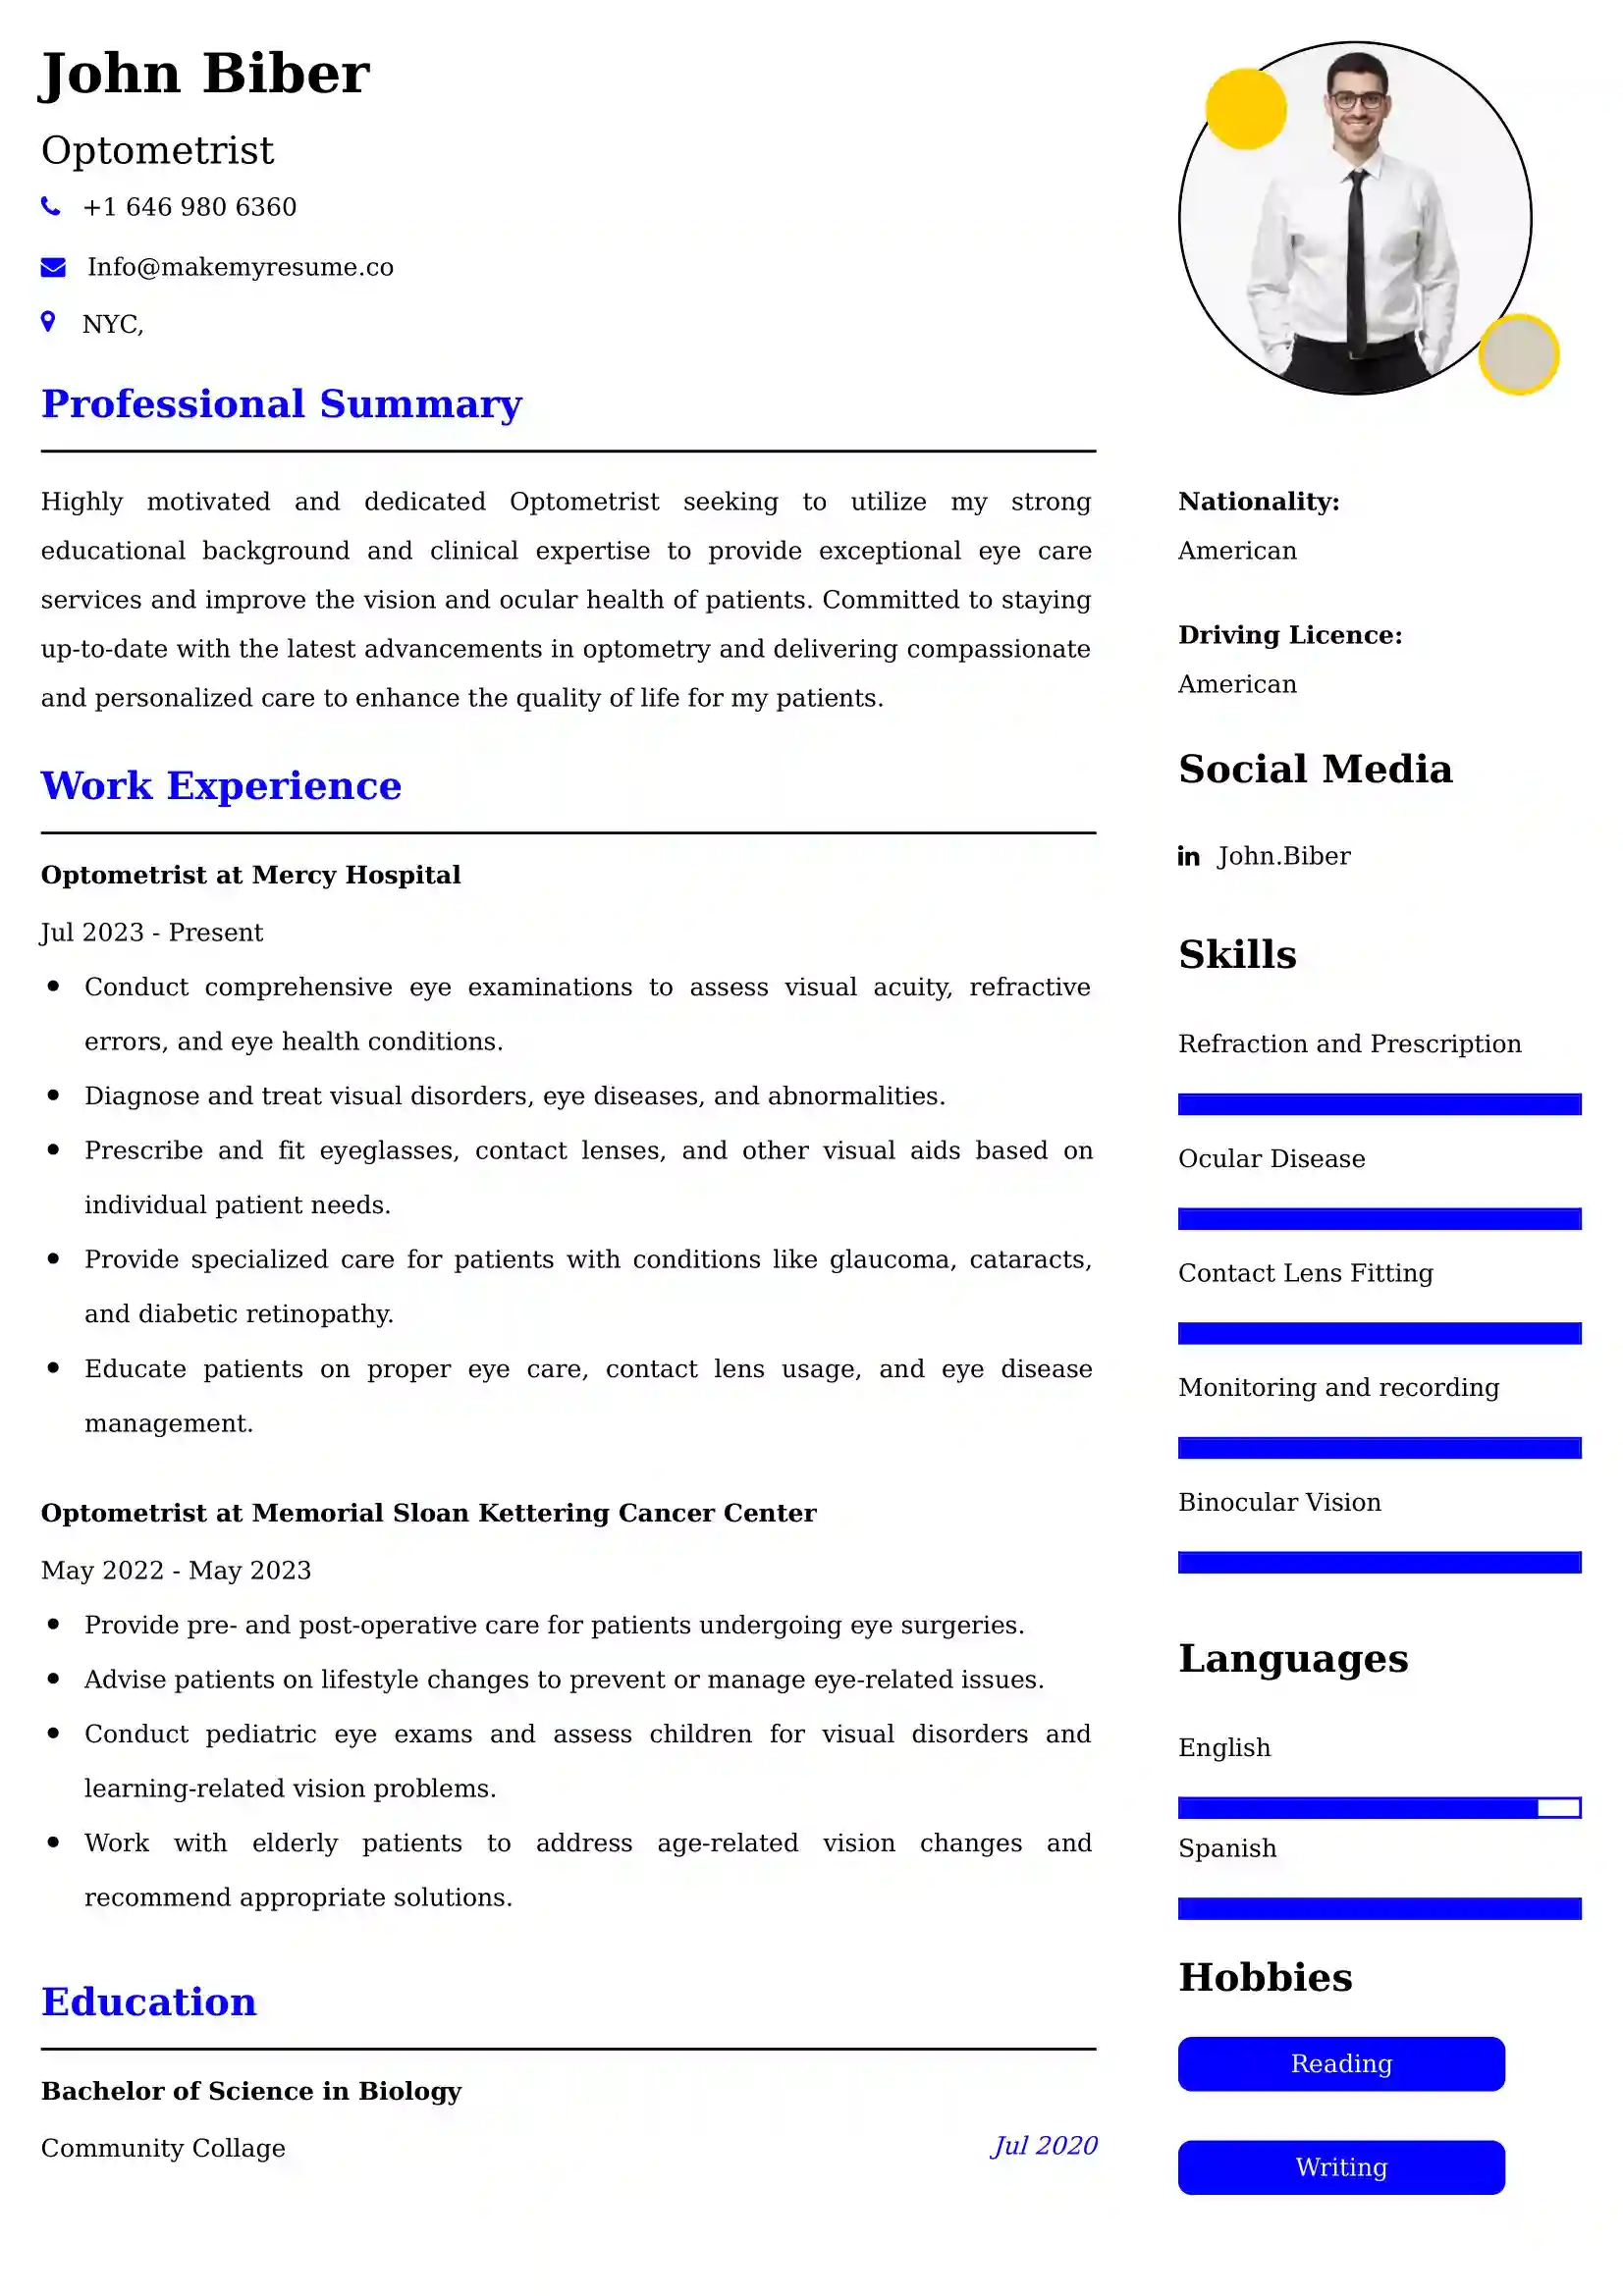 Optometrist Resume Examples for UK Jobs - Tips and Guide